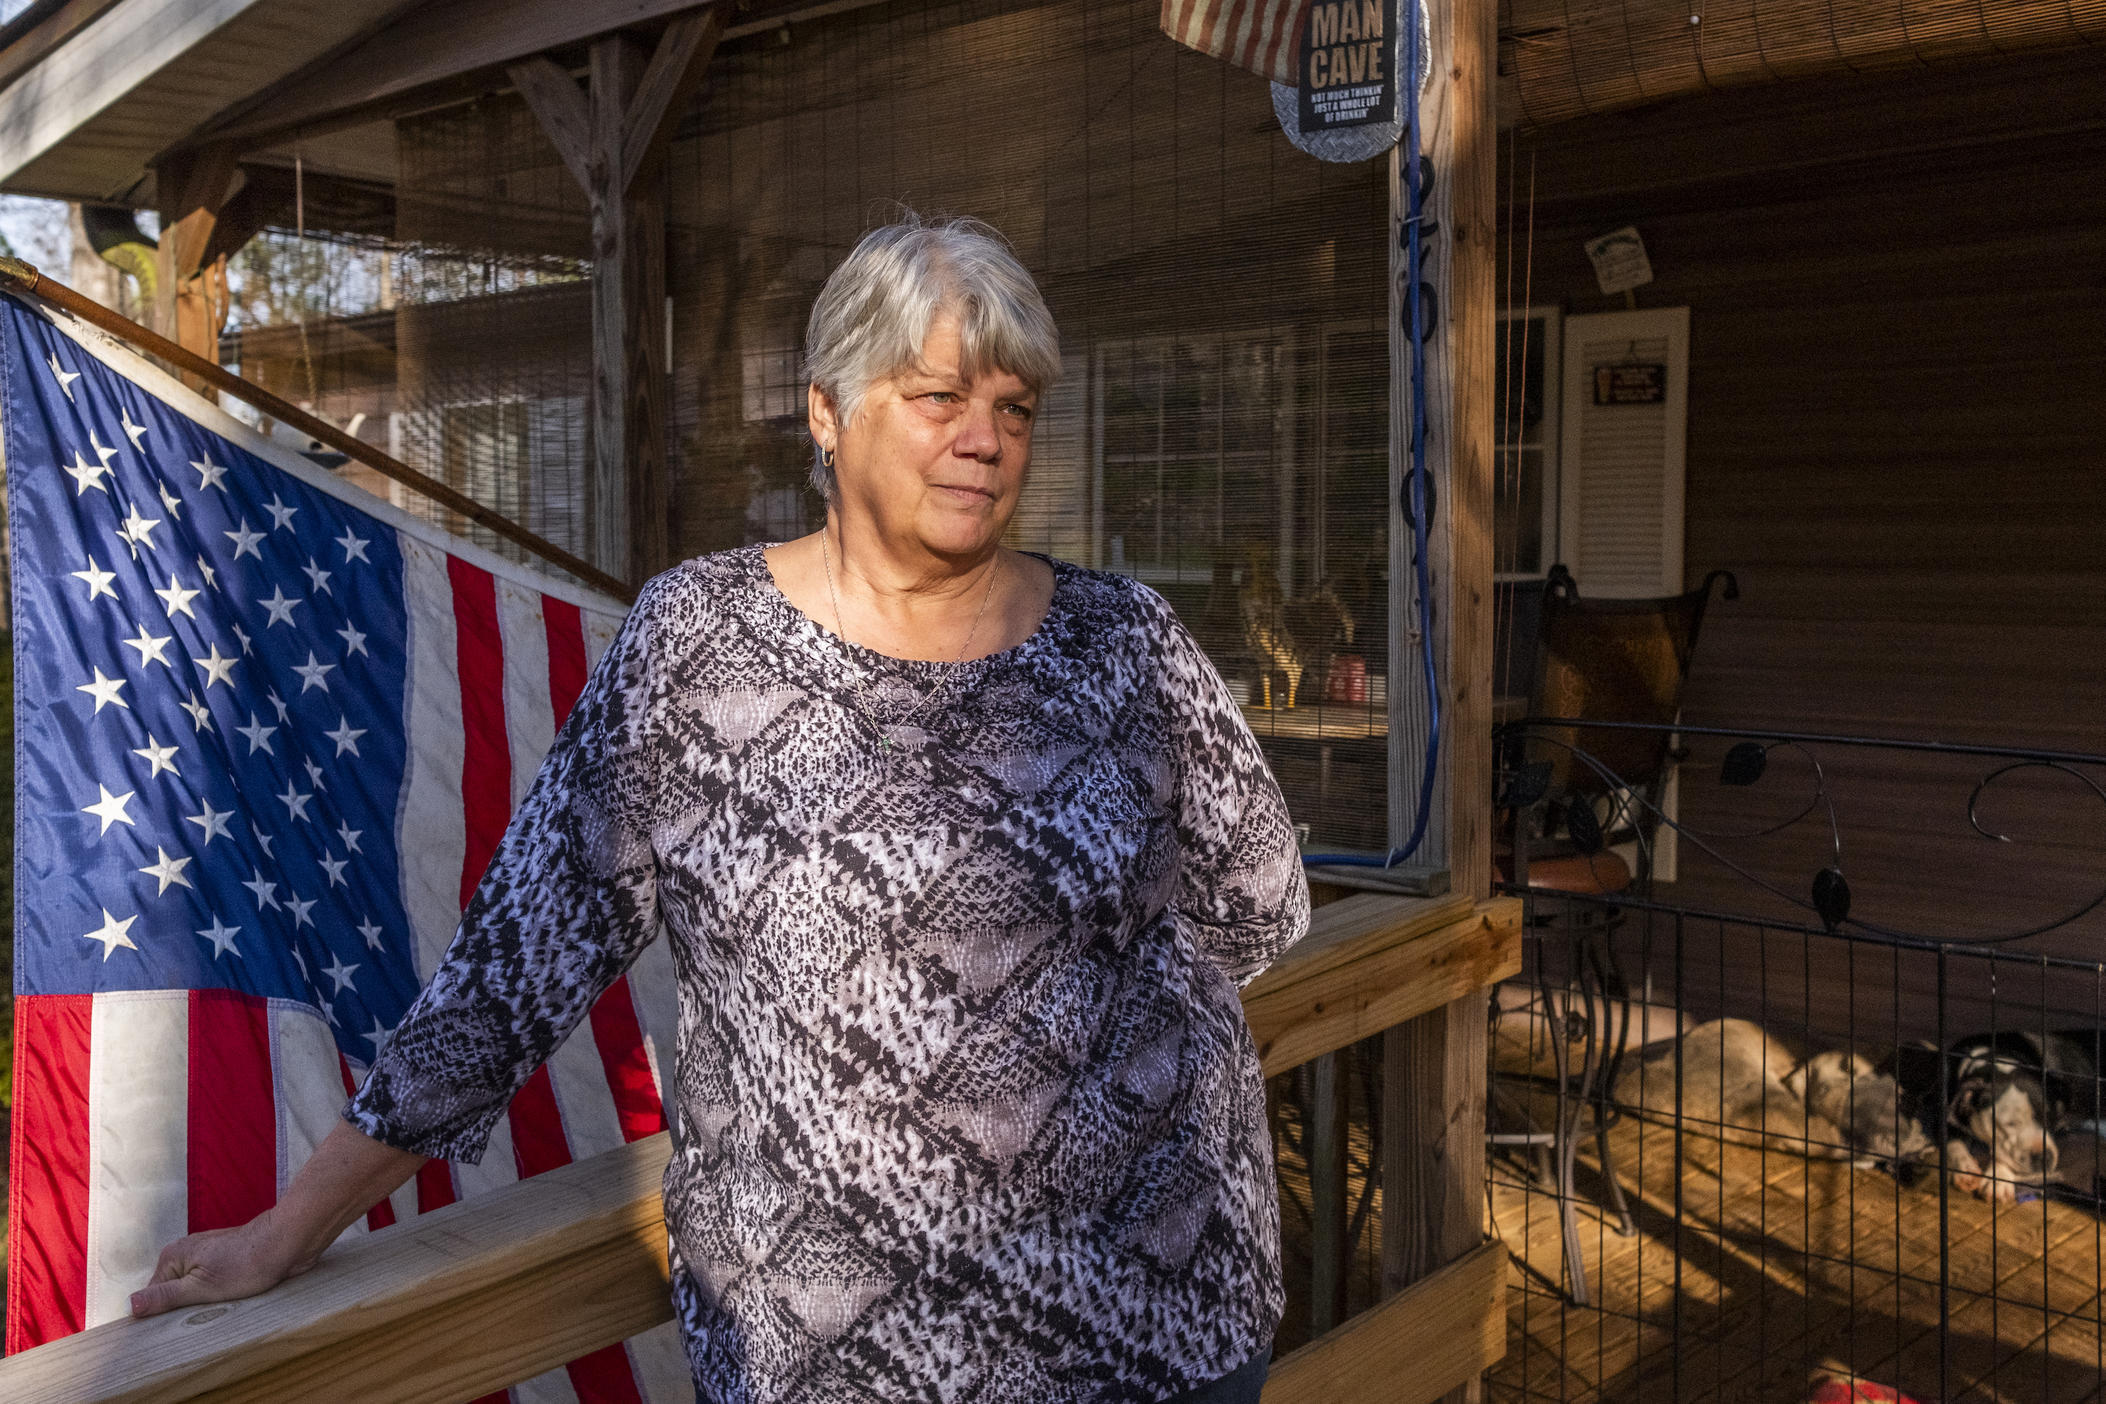 Gloria Hammond, 65, had just brought her husband Cason home to the family place on Luther Smith Road in Juliette, just through the tree line from the coal ash pond at Georgia Power's Plant Scherer, following his diagnosis with terminal cancer when officials from the utility came to ask to buy the home from them as they had done for many of their neighbors who have gotten sick over the years. The Hammonds told them to leave. Cason Hammond has since died. "They haven't offered me nothing," Hammond said.